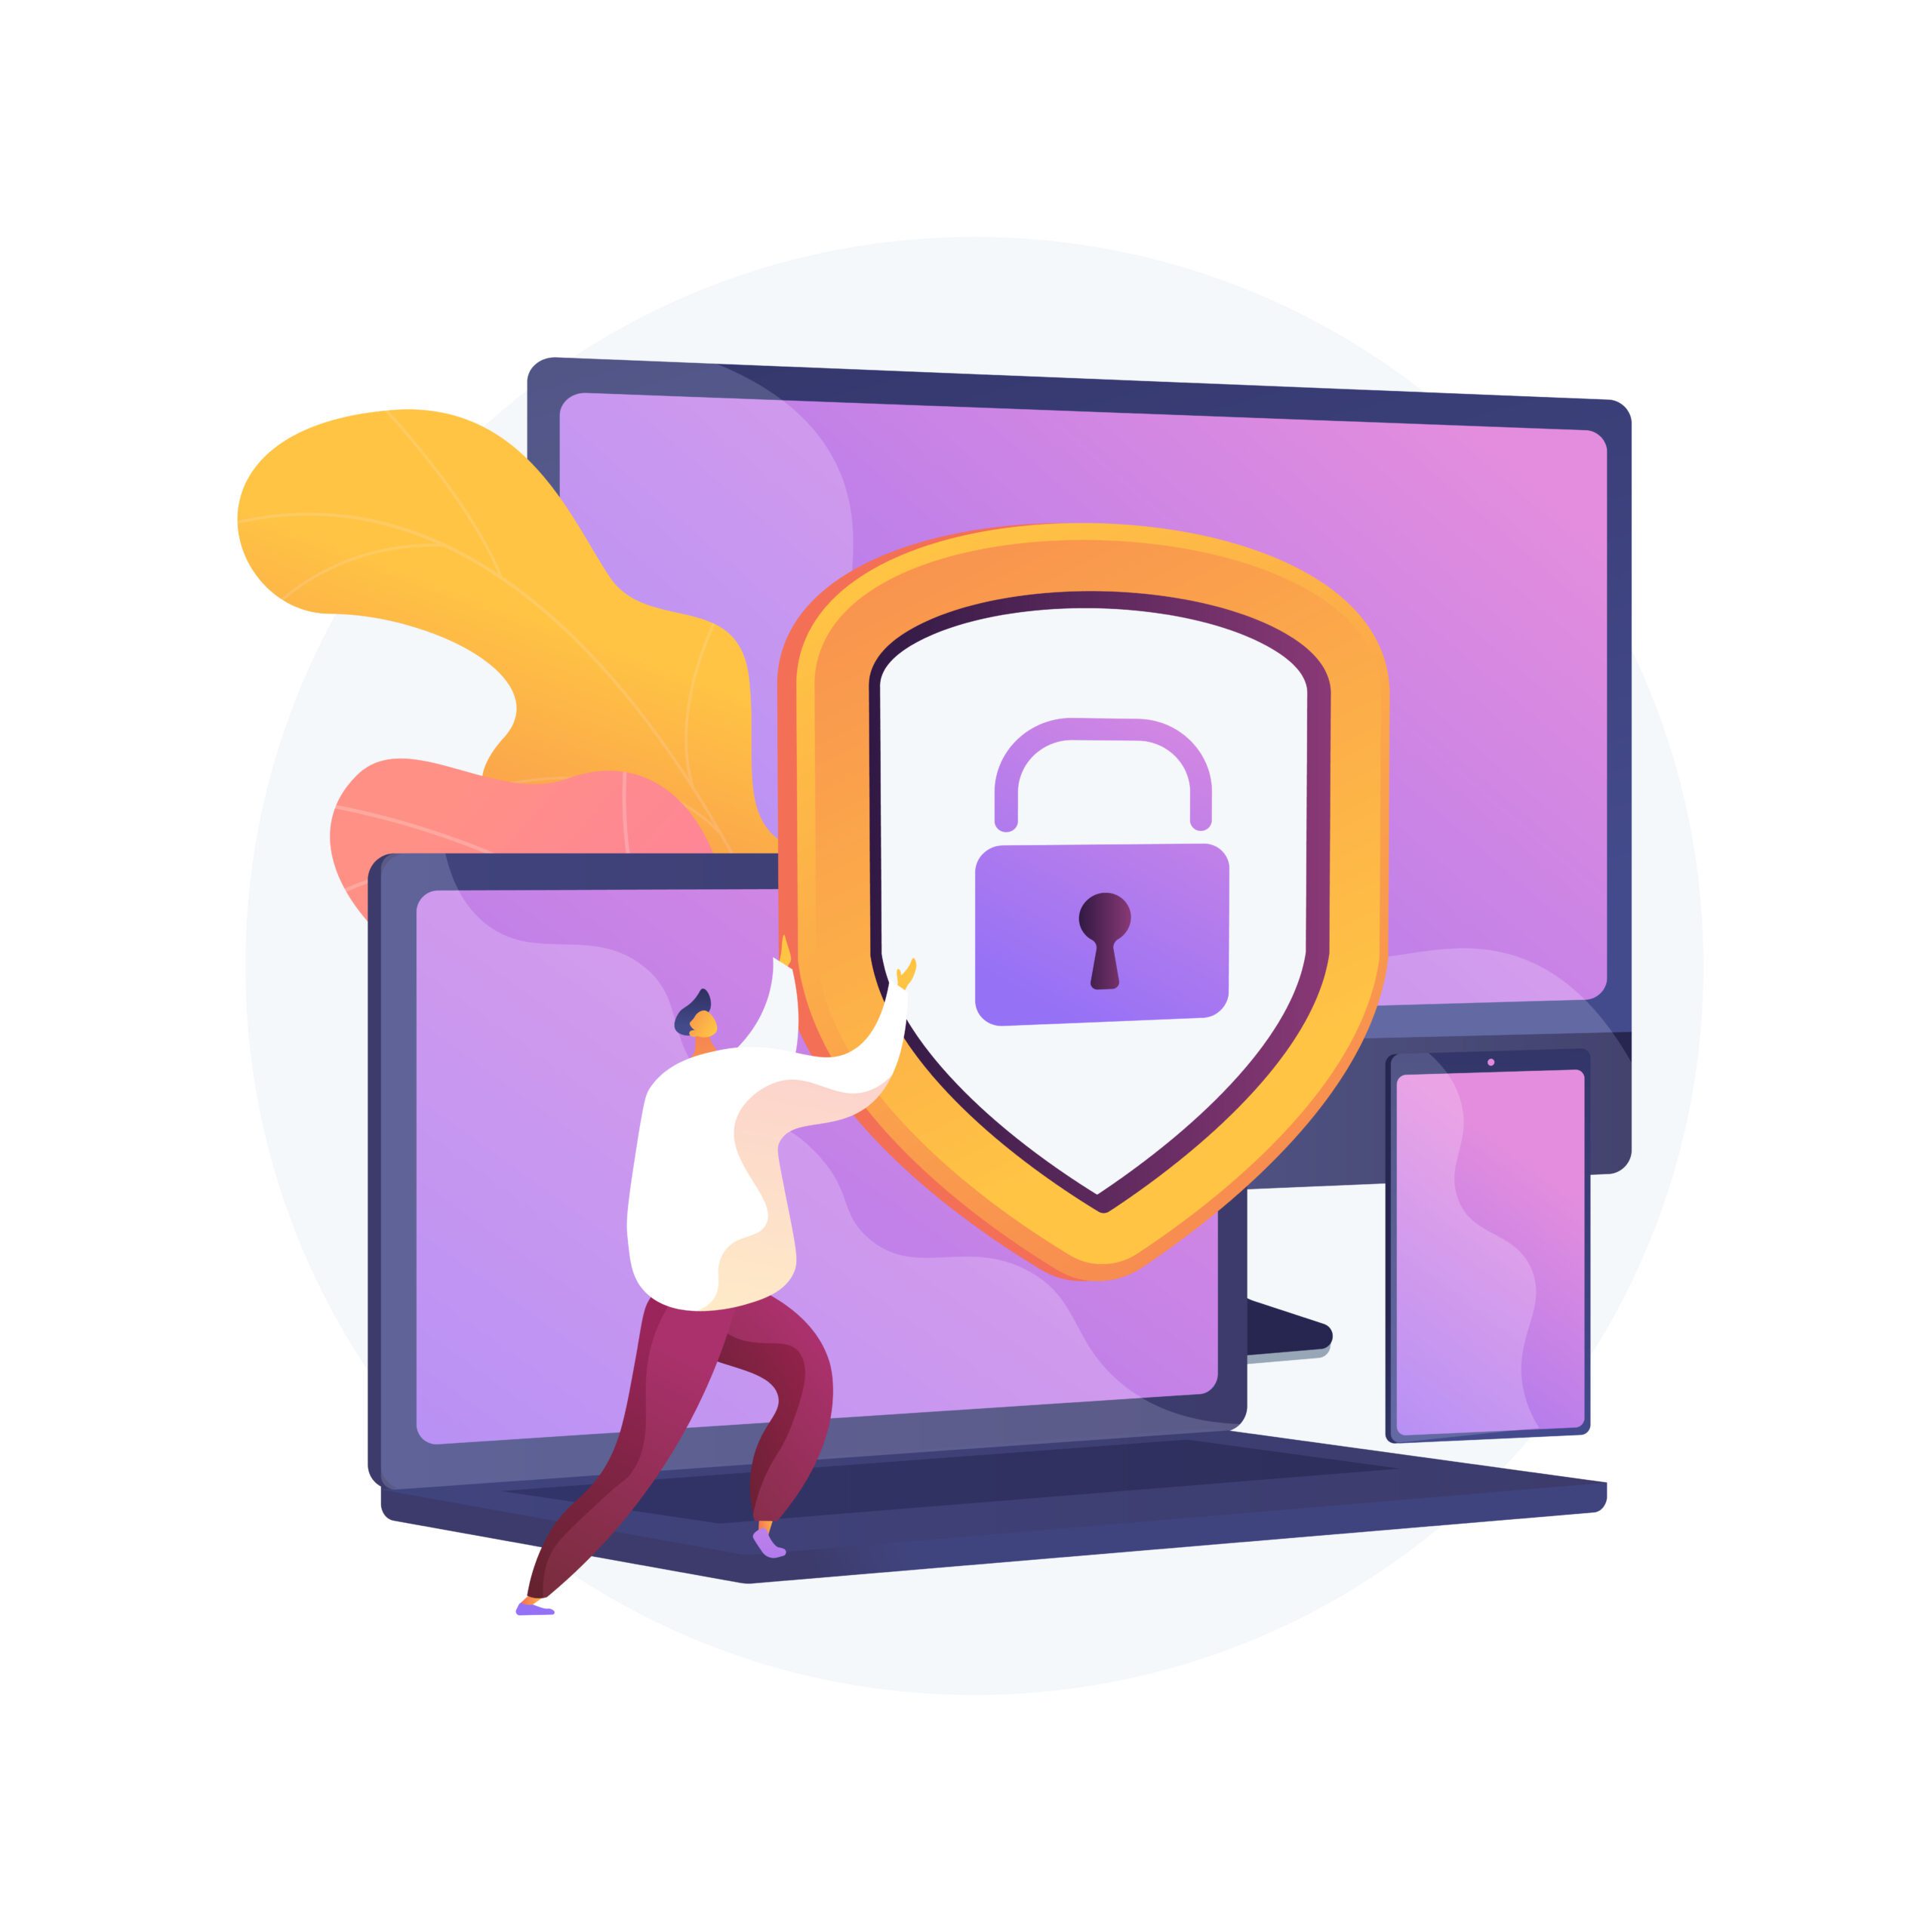 General data security. Personal information protection, database access control, cyber privacy. Synchronized gadgets, cross platform devices regulation. Vector isolated concept metaphor illustration